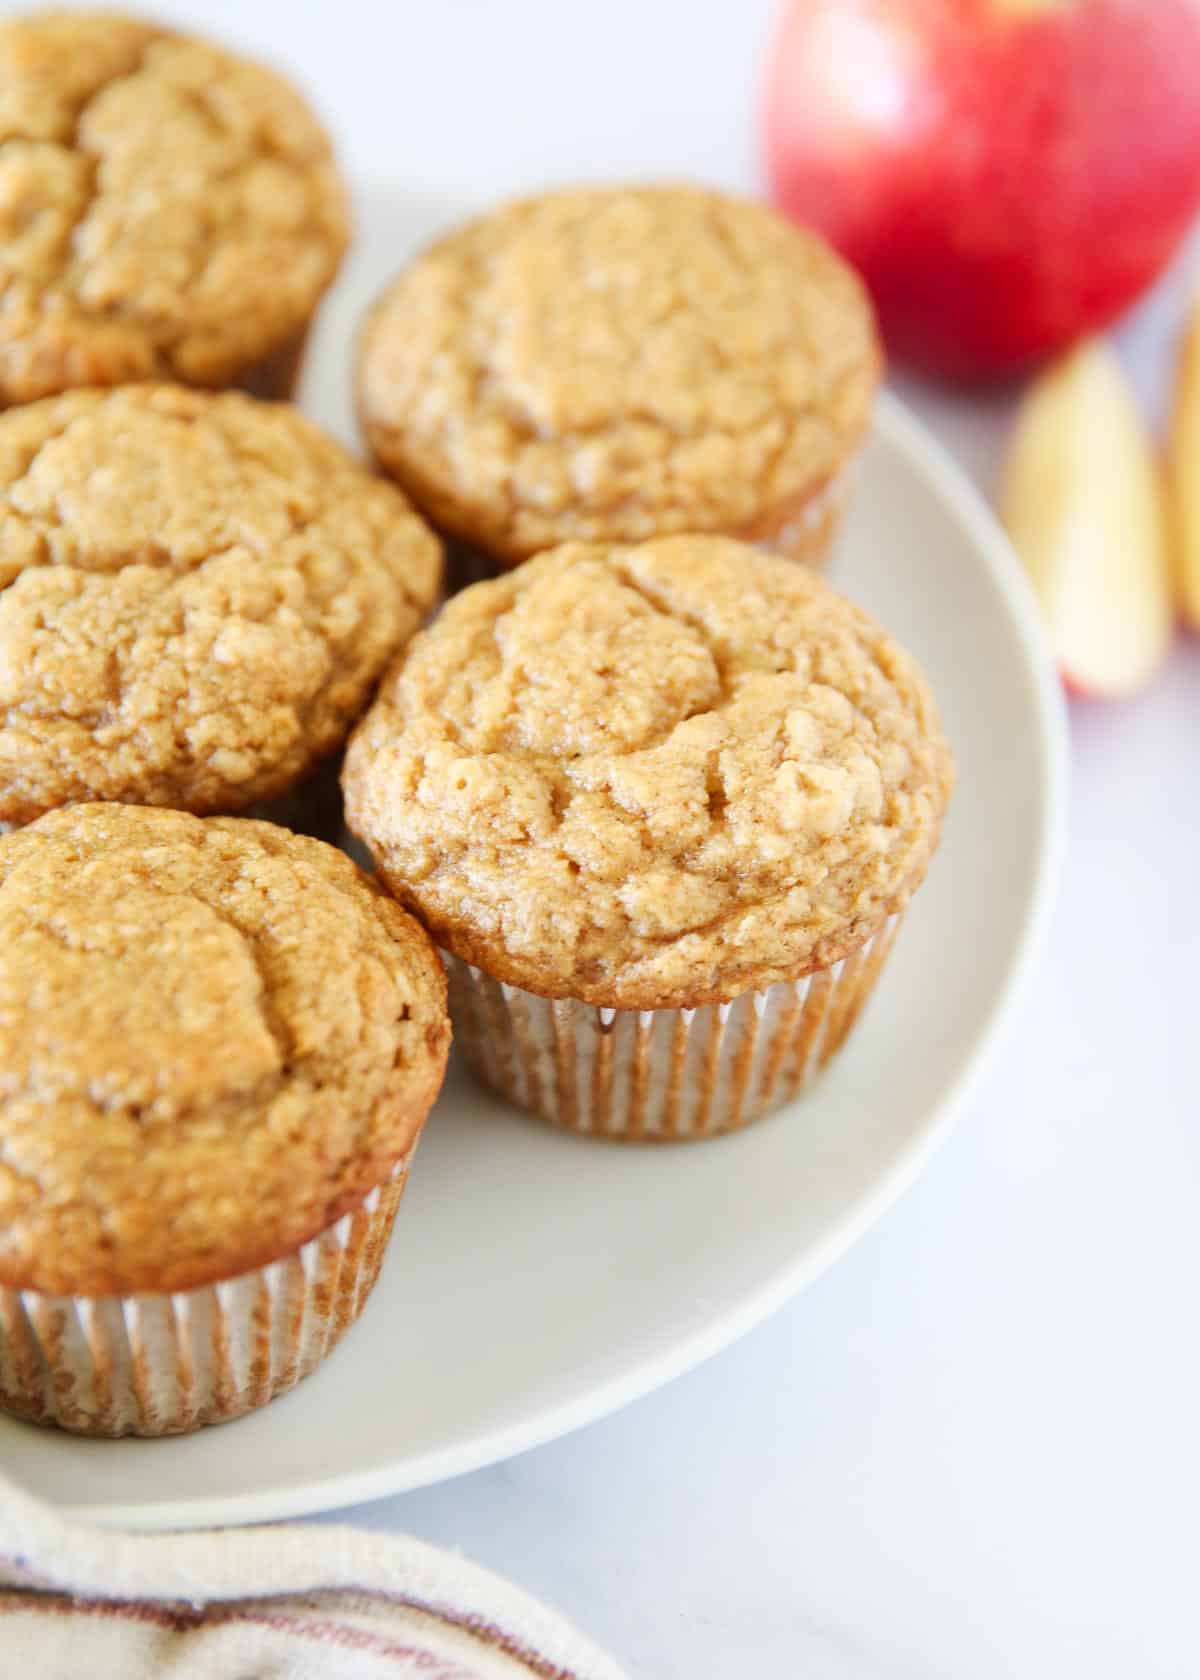 Applesauce muffins on a plate.